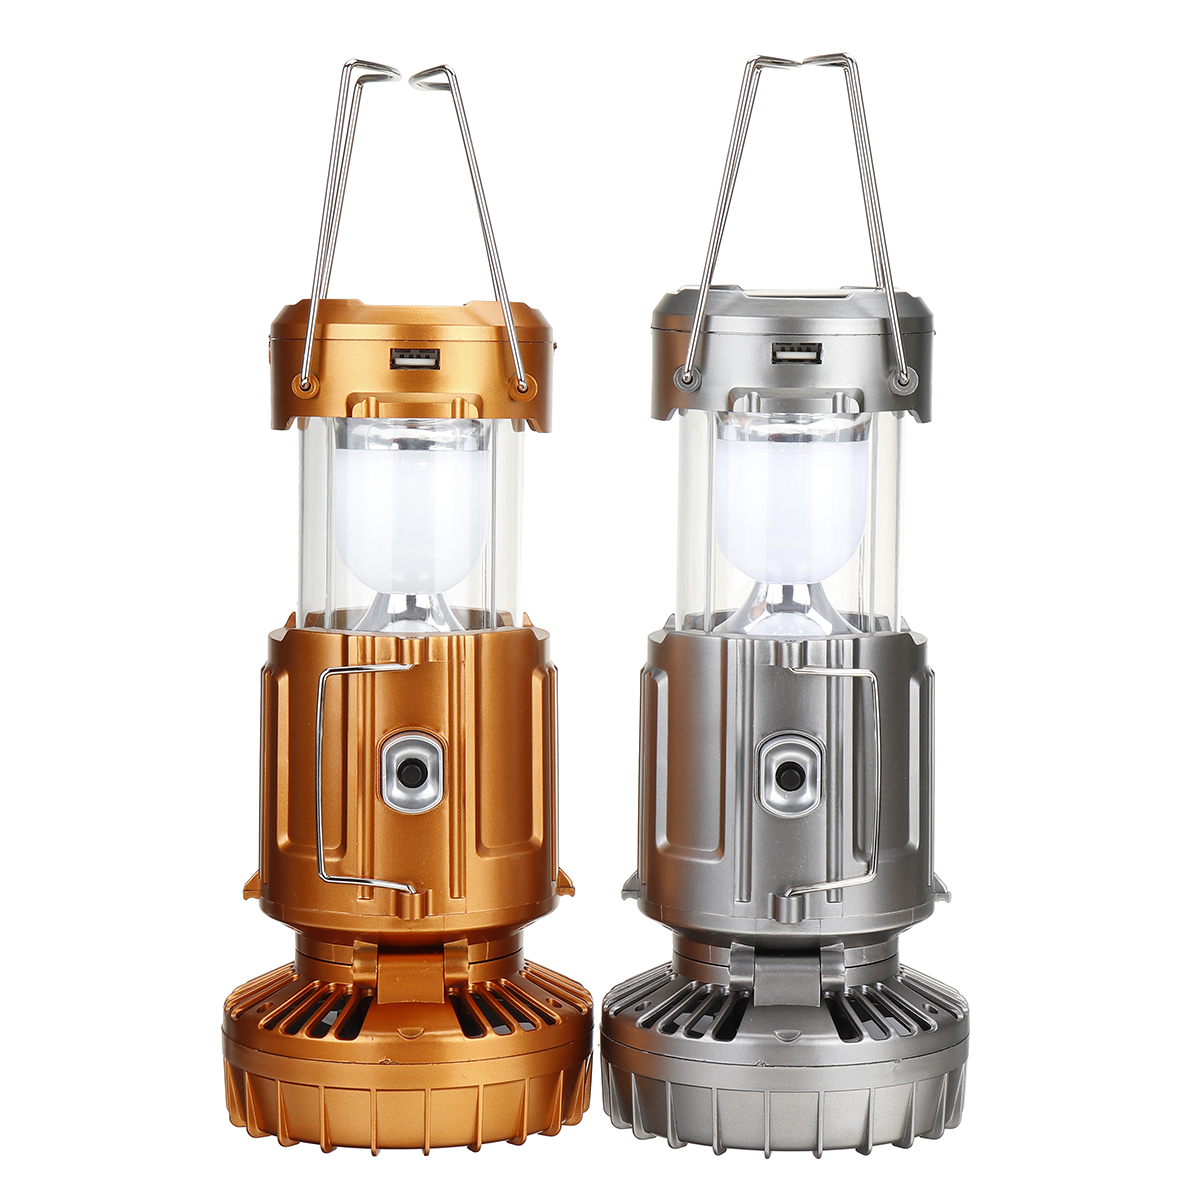 Solar-Outdoor-Fan-Rechargeable-Camping-Lantern-Light-LED-Hand-Lamp-Flashlight-1763838-2